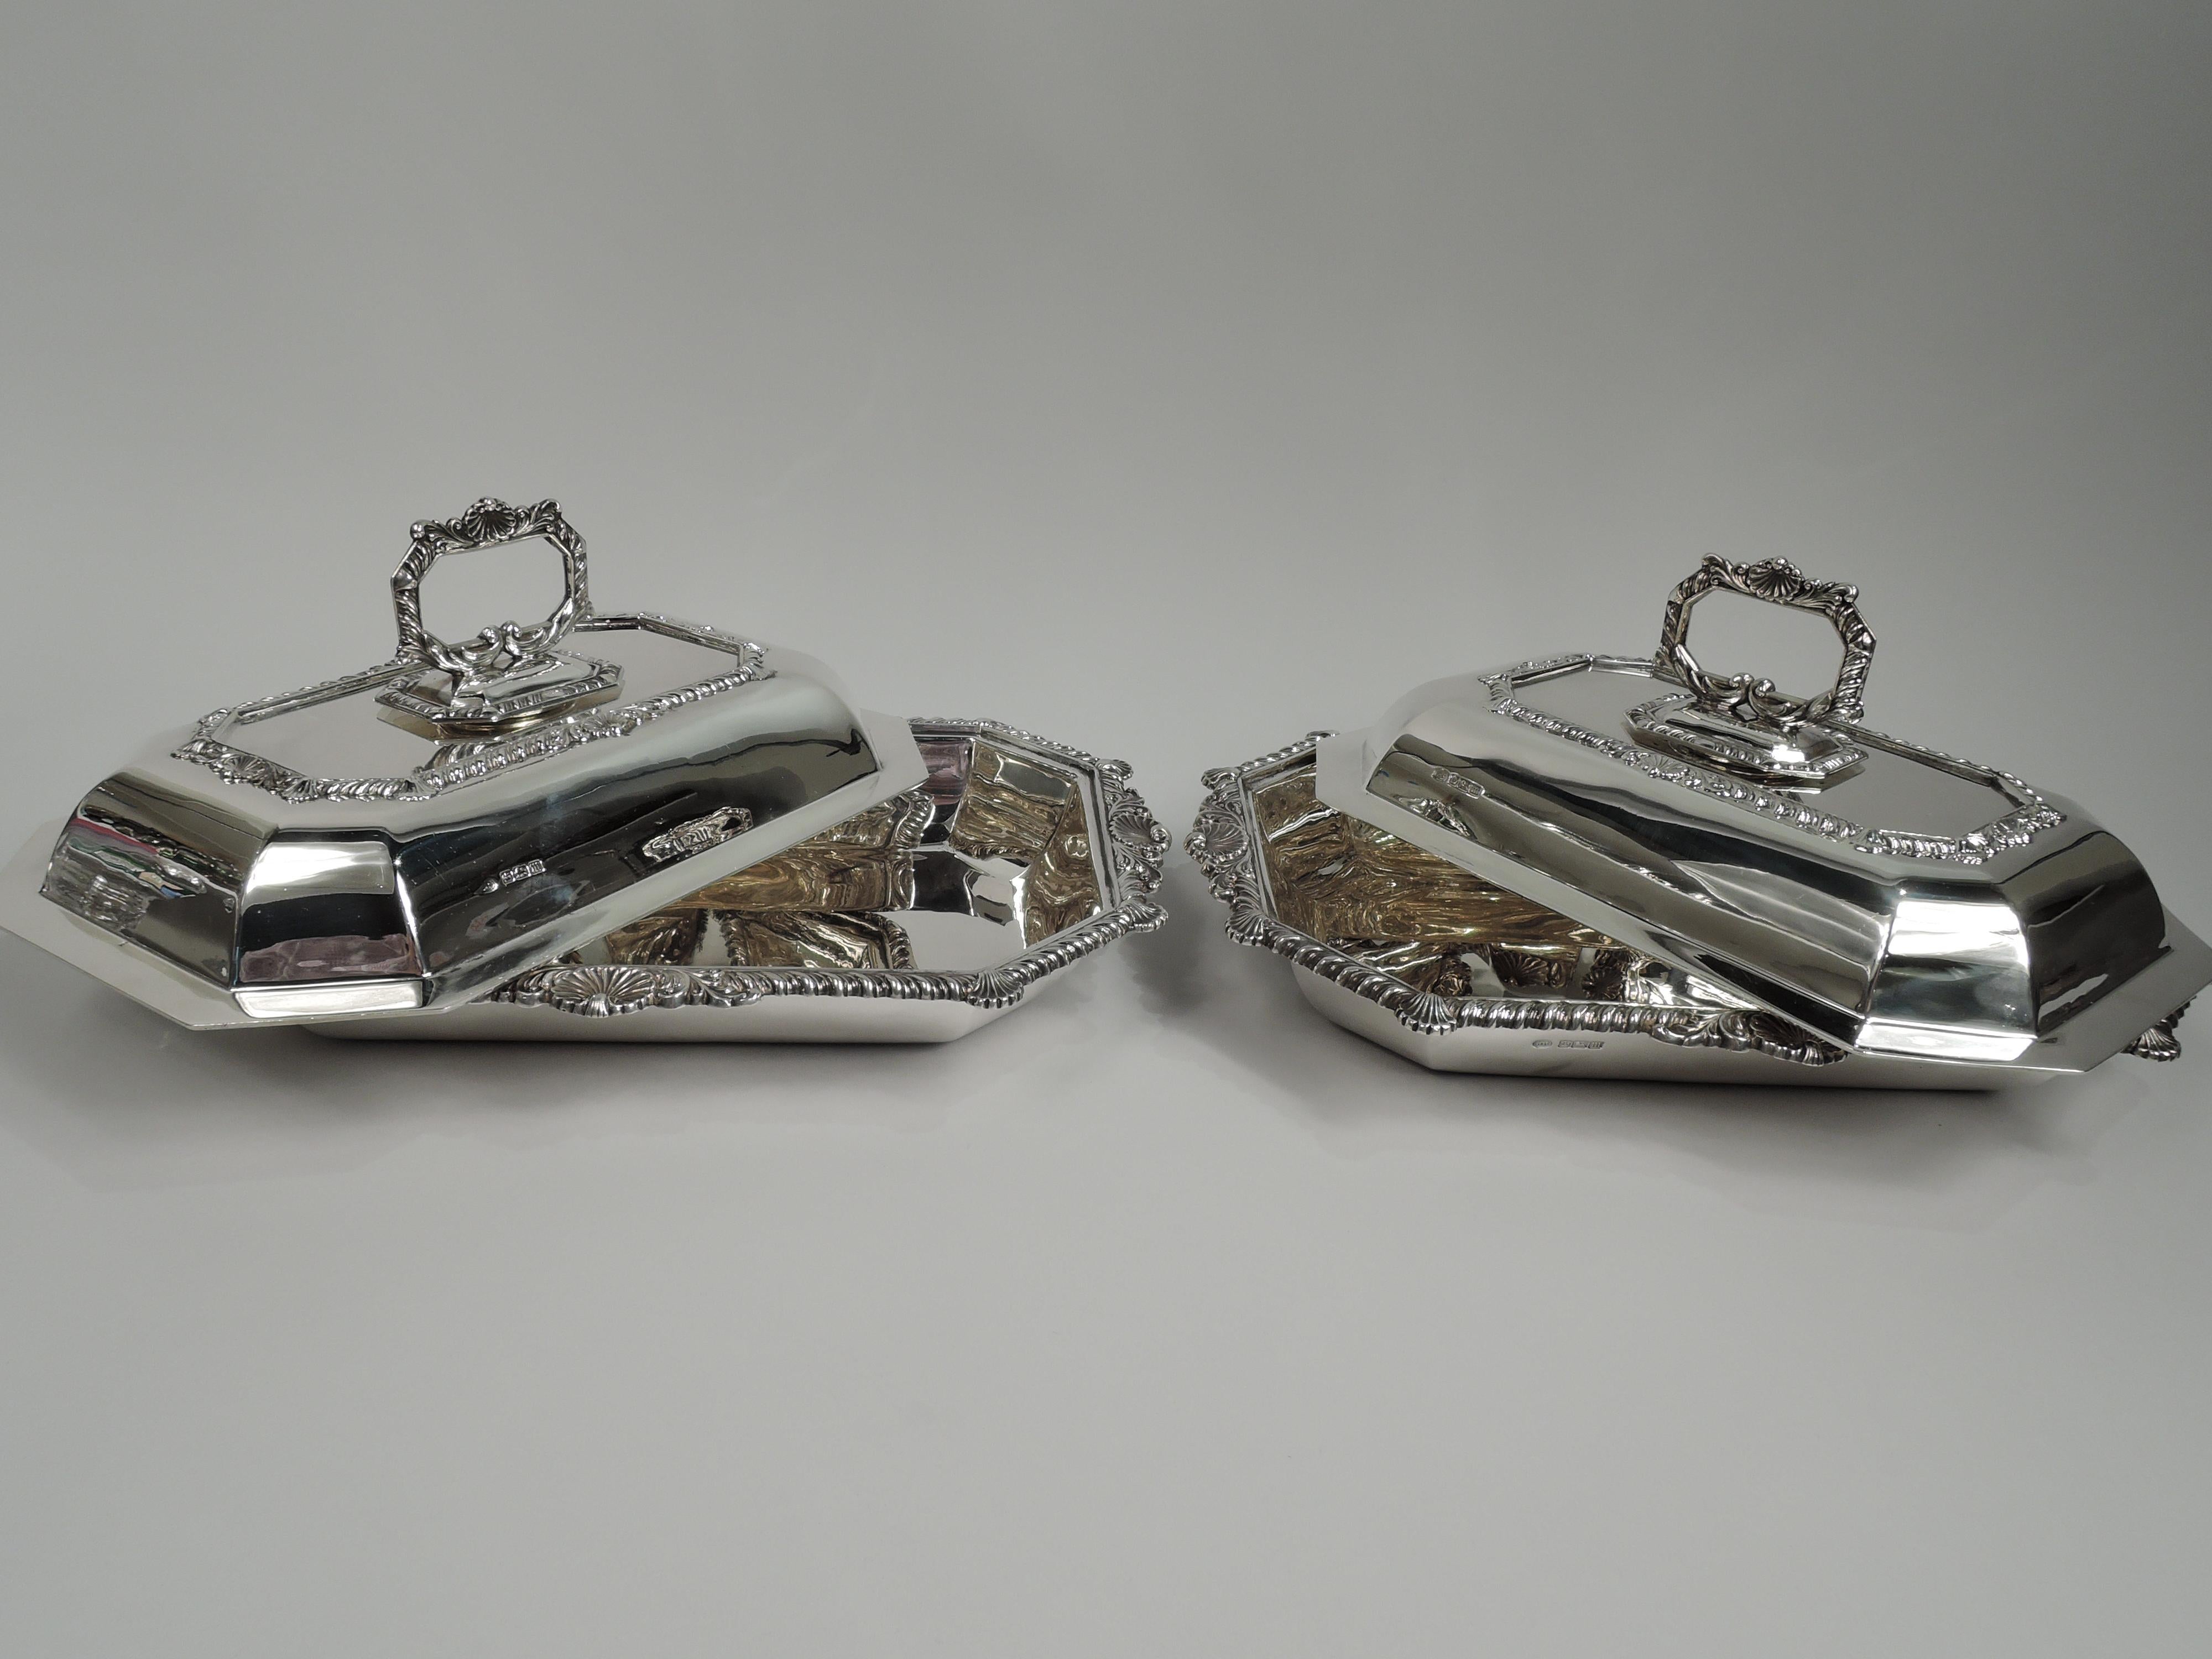 Pair of Antique English Edwardian Georgian Covered Serving Dishes  In Excellent Condition For Sale In New York, NY